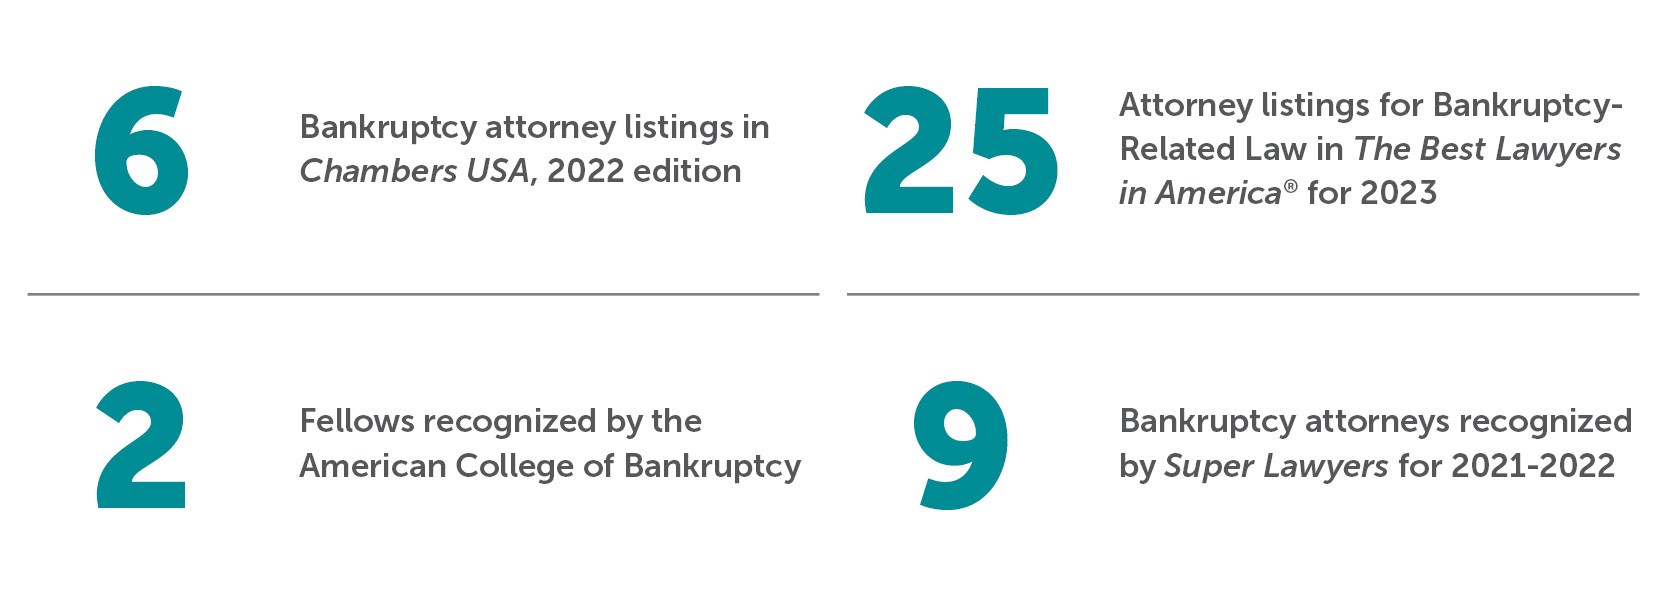 Bradley by the Numbers Bankruptcy